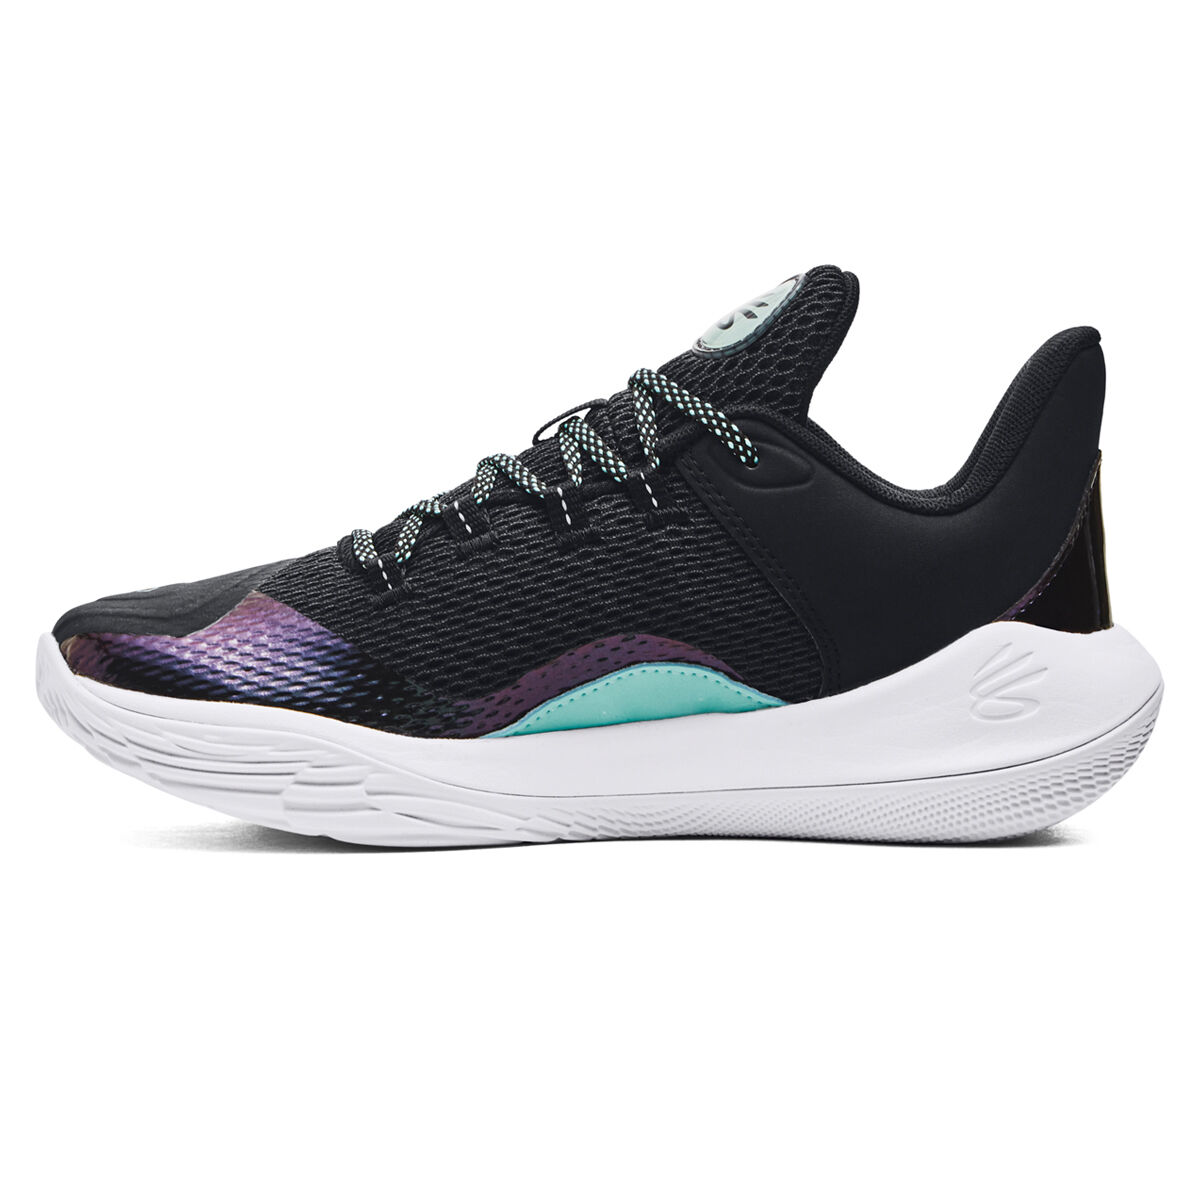 Under Armour Curry Flow 9 White/Multicolor Men's Basketball Shoes, Purple/Pink, Size: 10.5